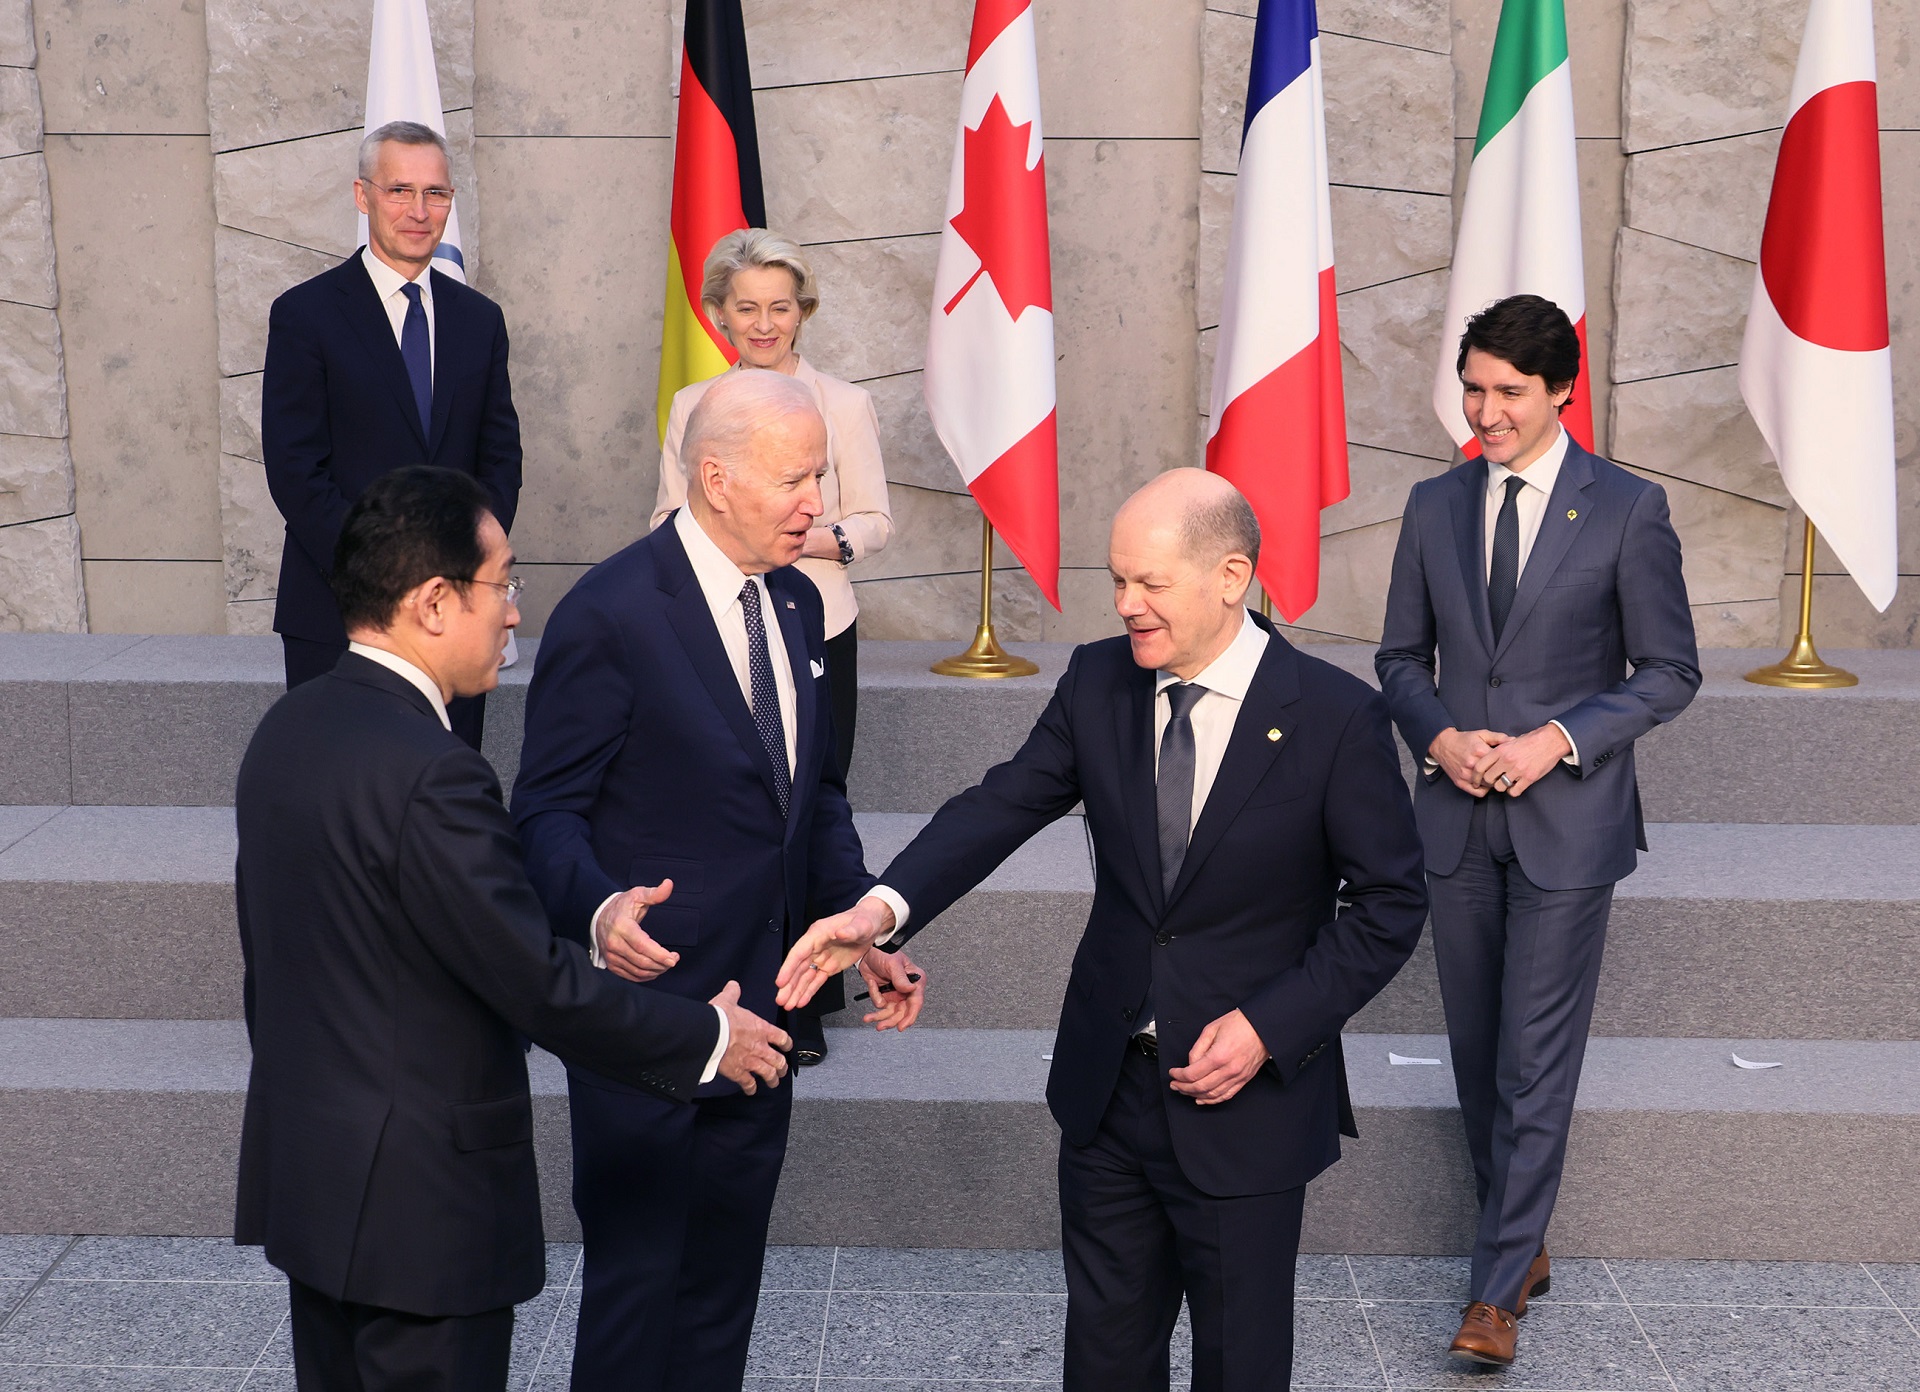 Ｇ７首脳との集合写真撮影２